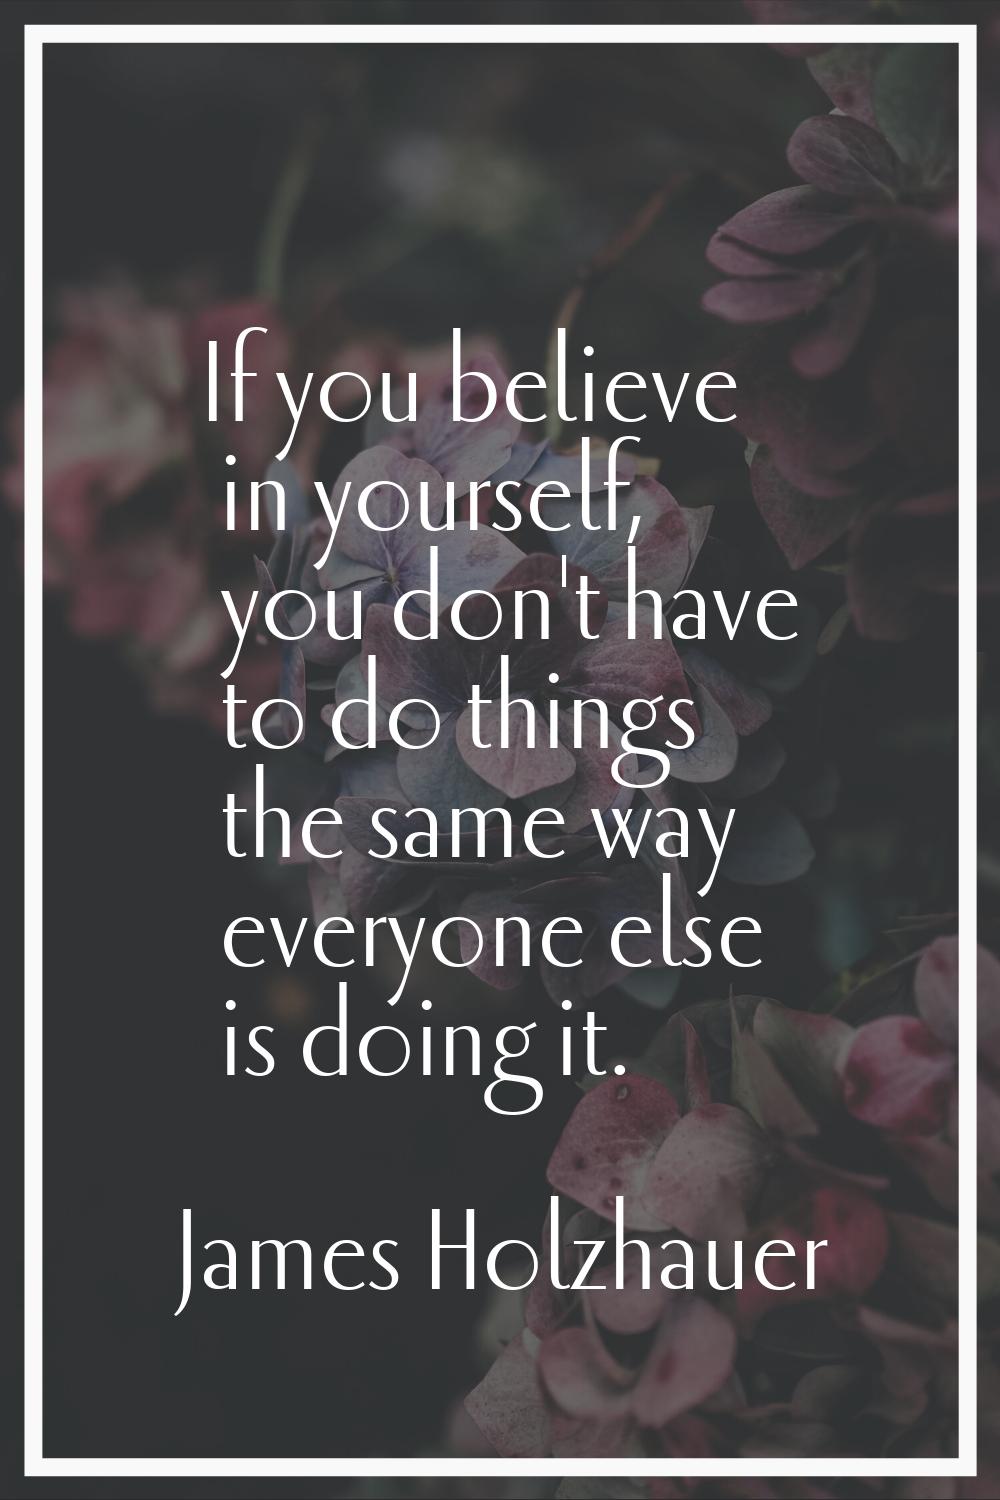 If you believe in yourself, you don't have to do things the same way everyone else is doing it.